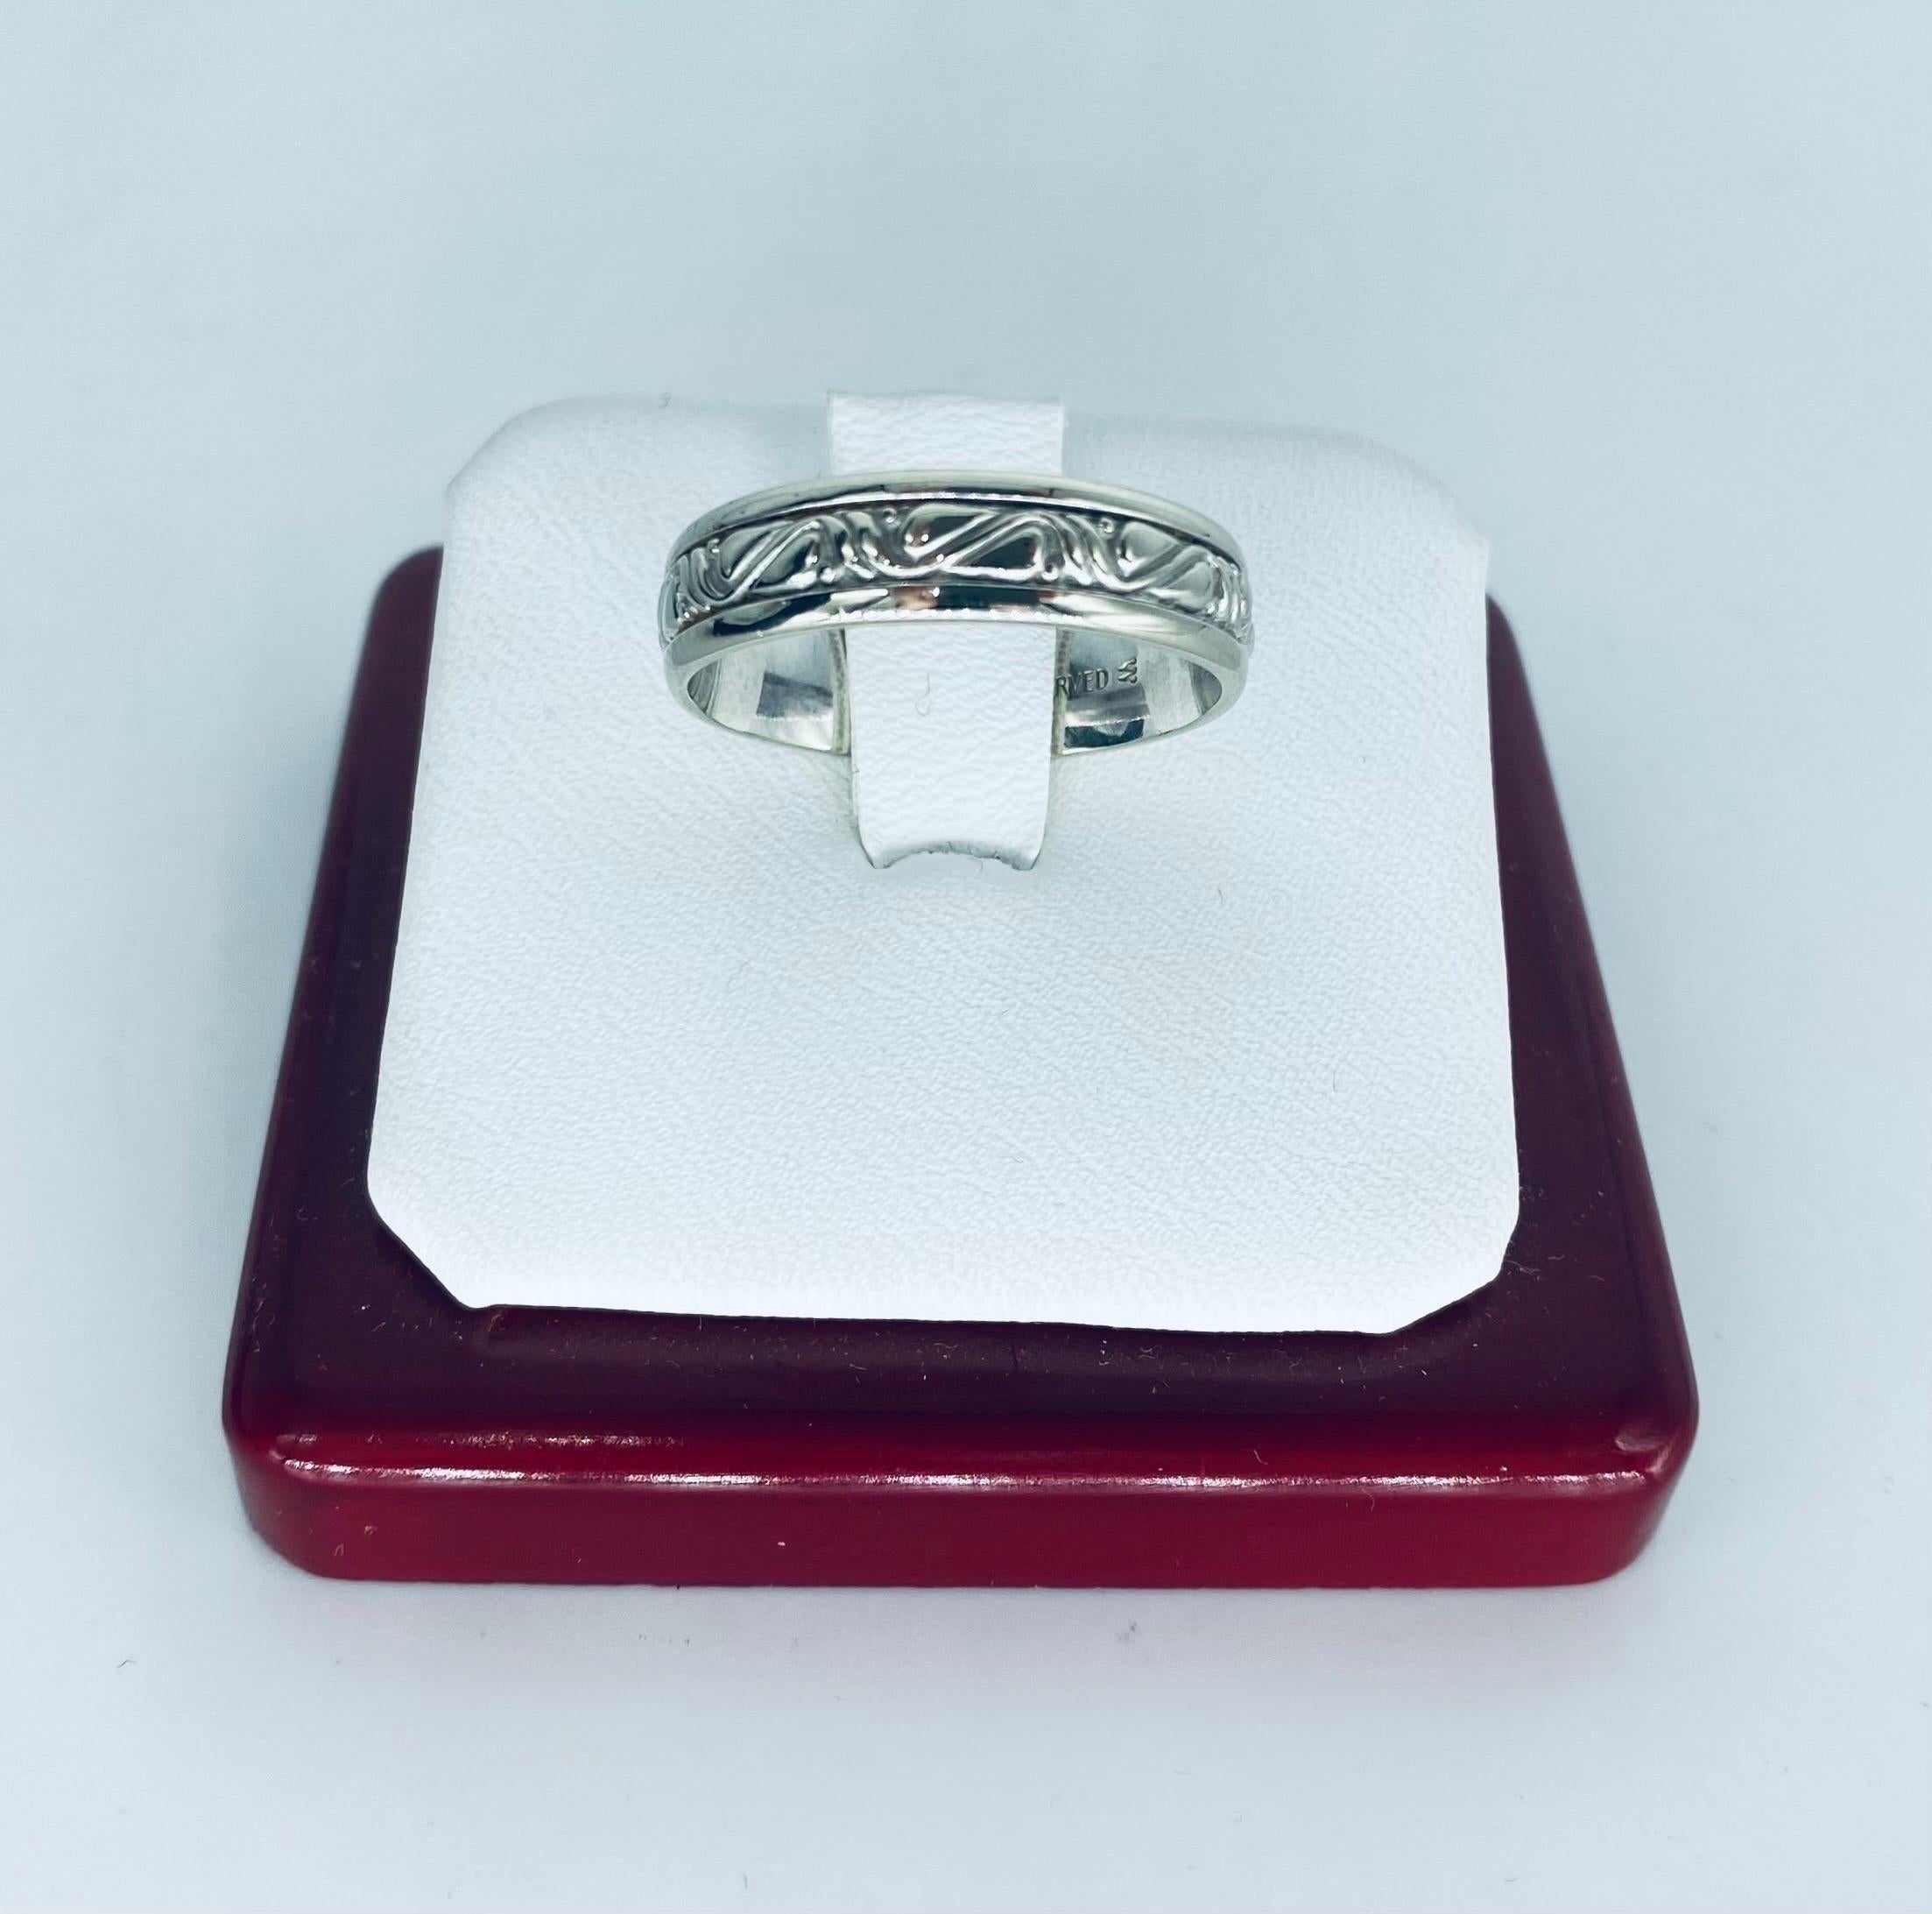 Artcarved 5.80mm Artistic Design Band Ring 14k White Gold. The ring is a size 9.5 and weights 6.2 grams 14k gold. The ring is made by Artcarved, and is very comfortable fit. Very rare to find in these rings.